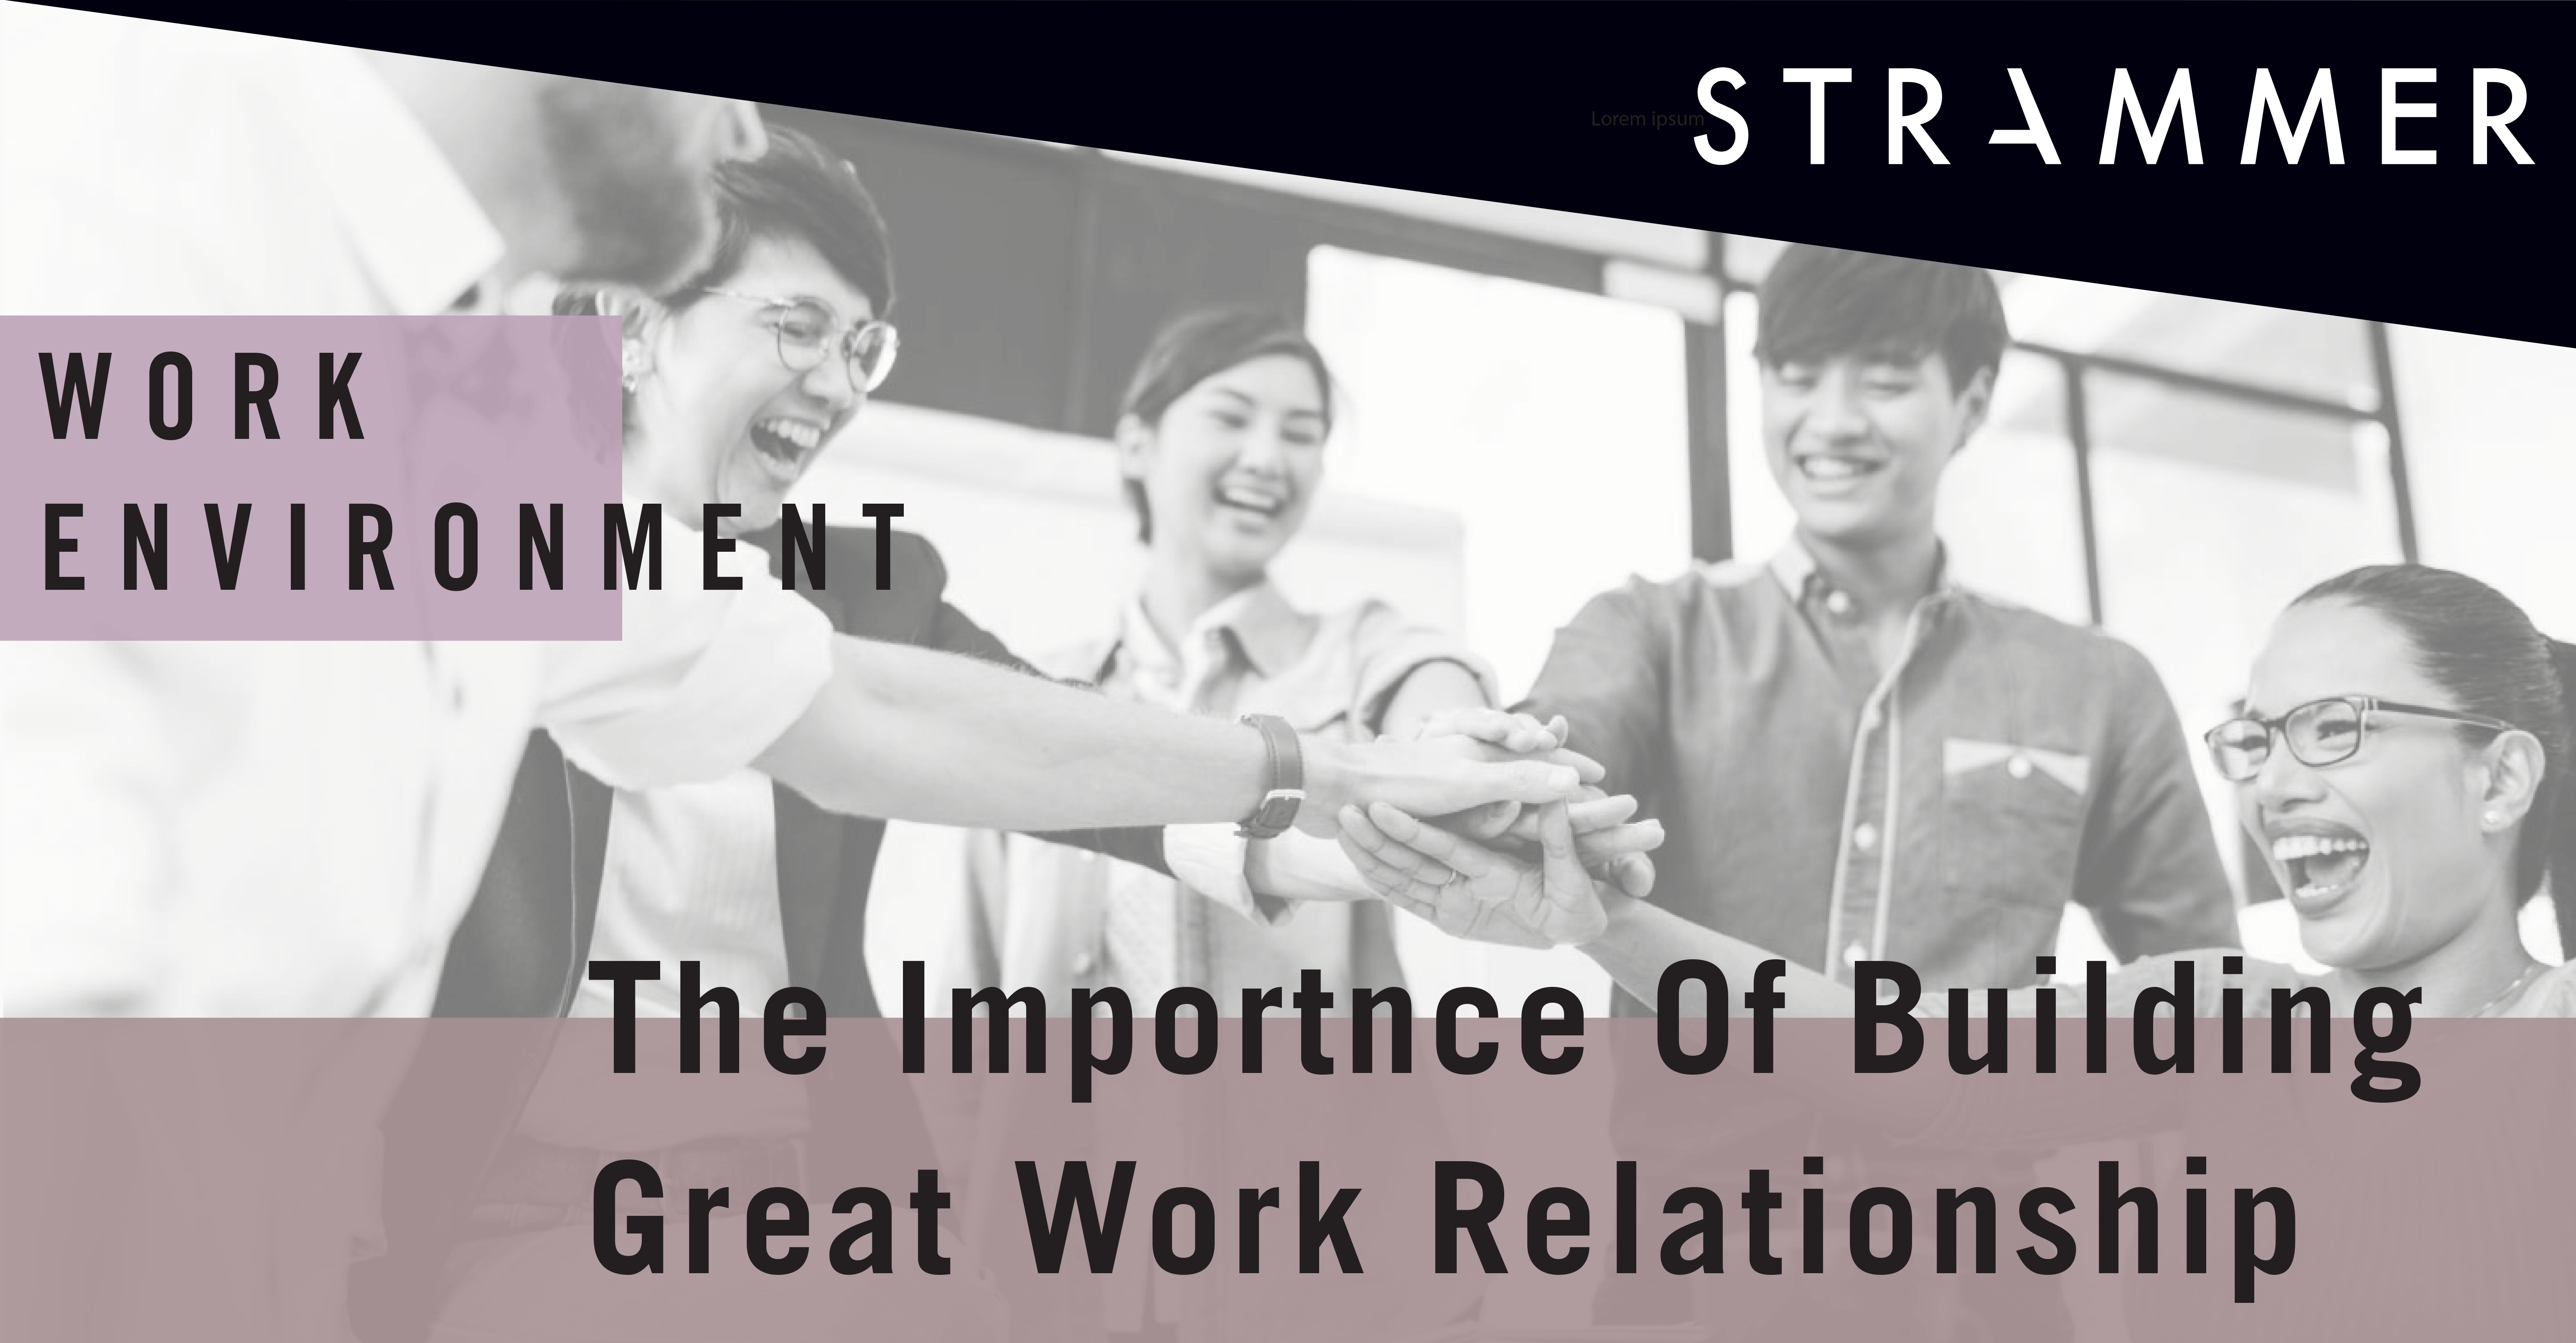 Great Working Relationships: How to Build Them?